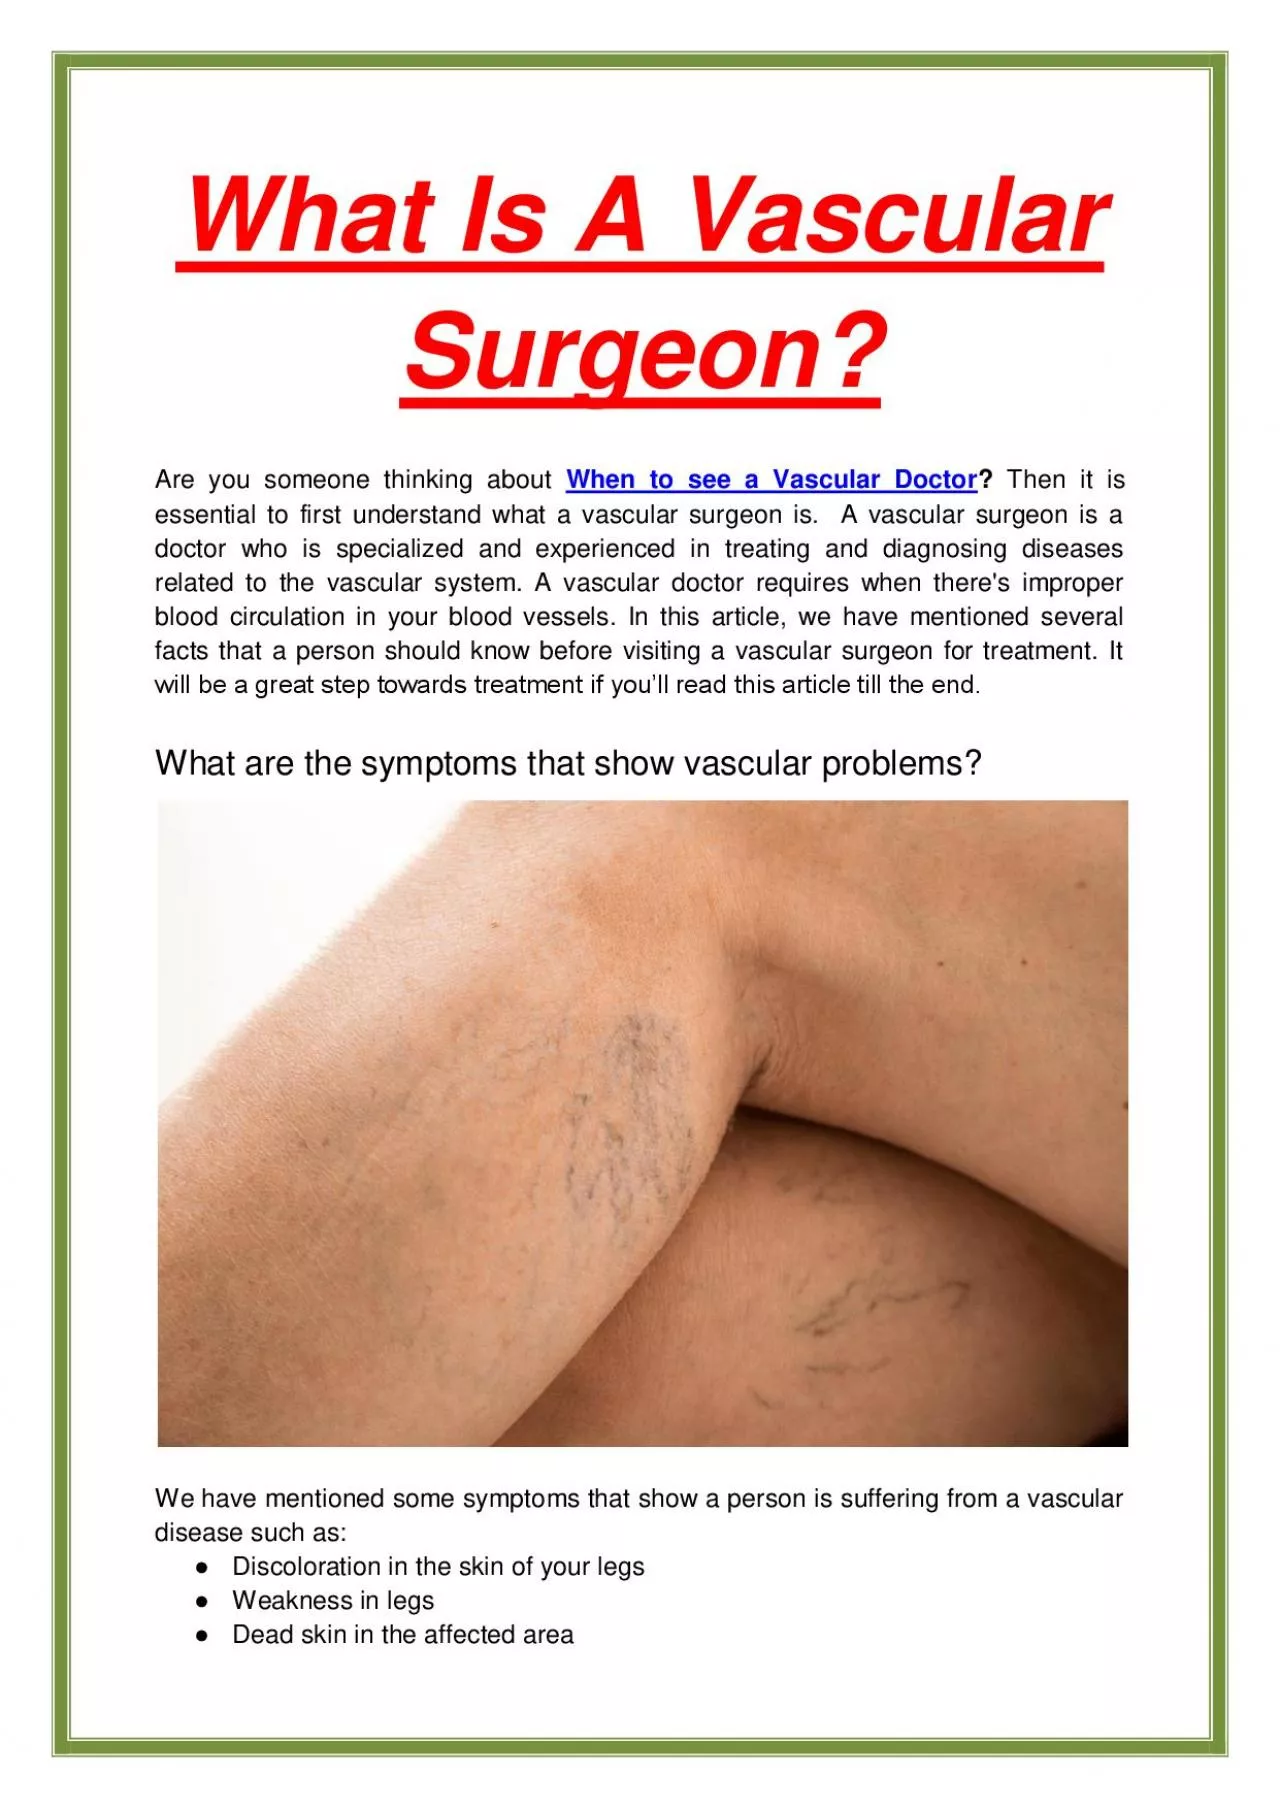 What Is A Vascular Surgeon?